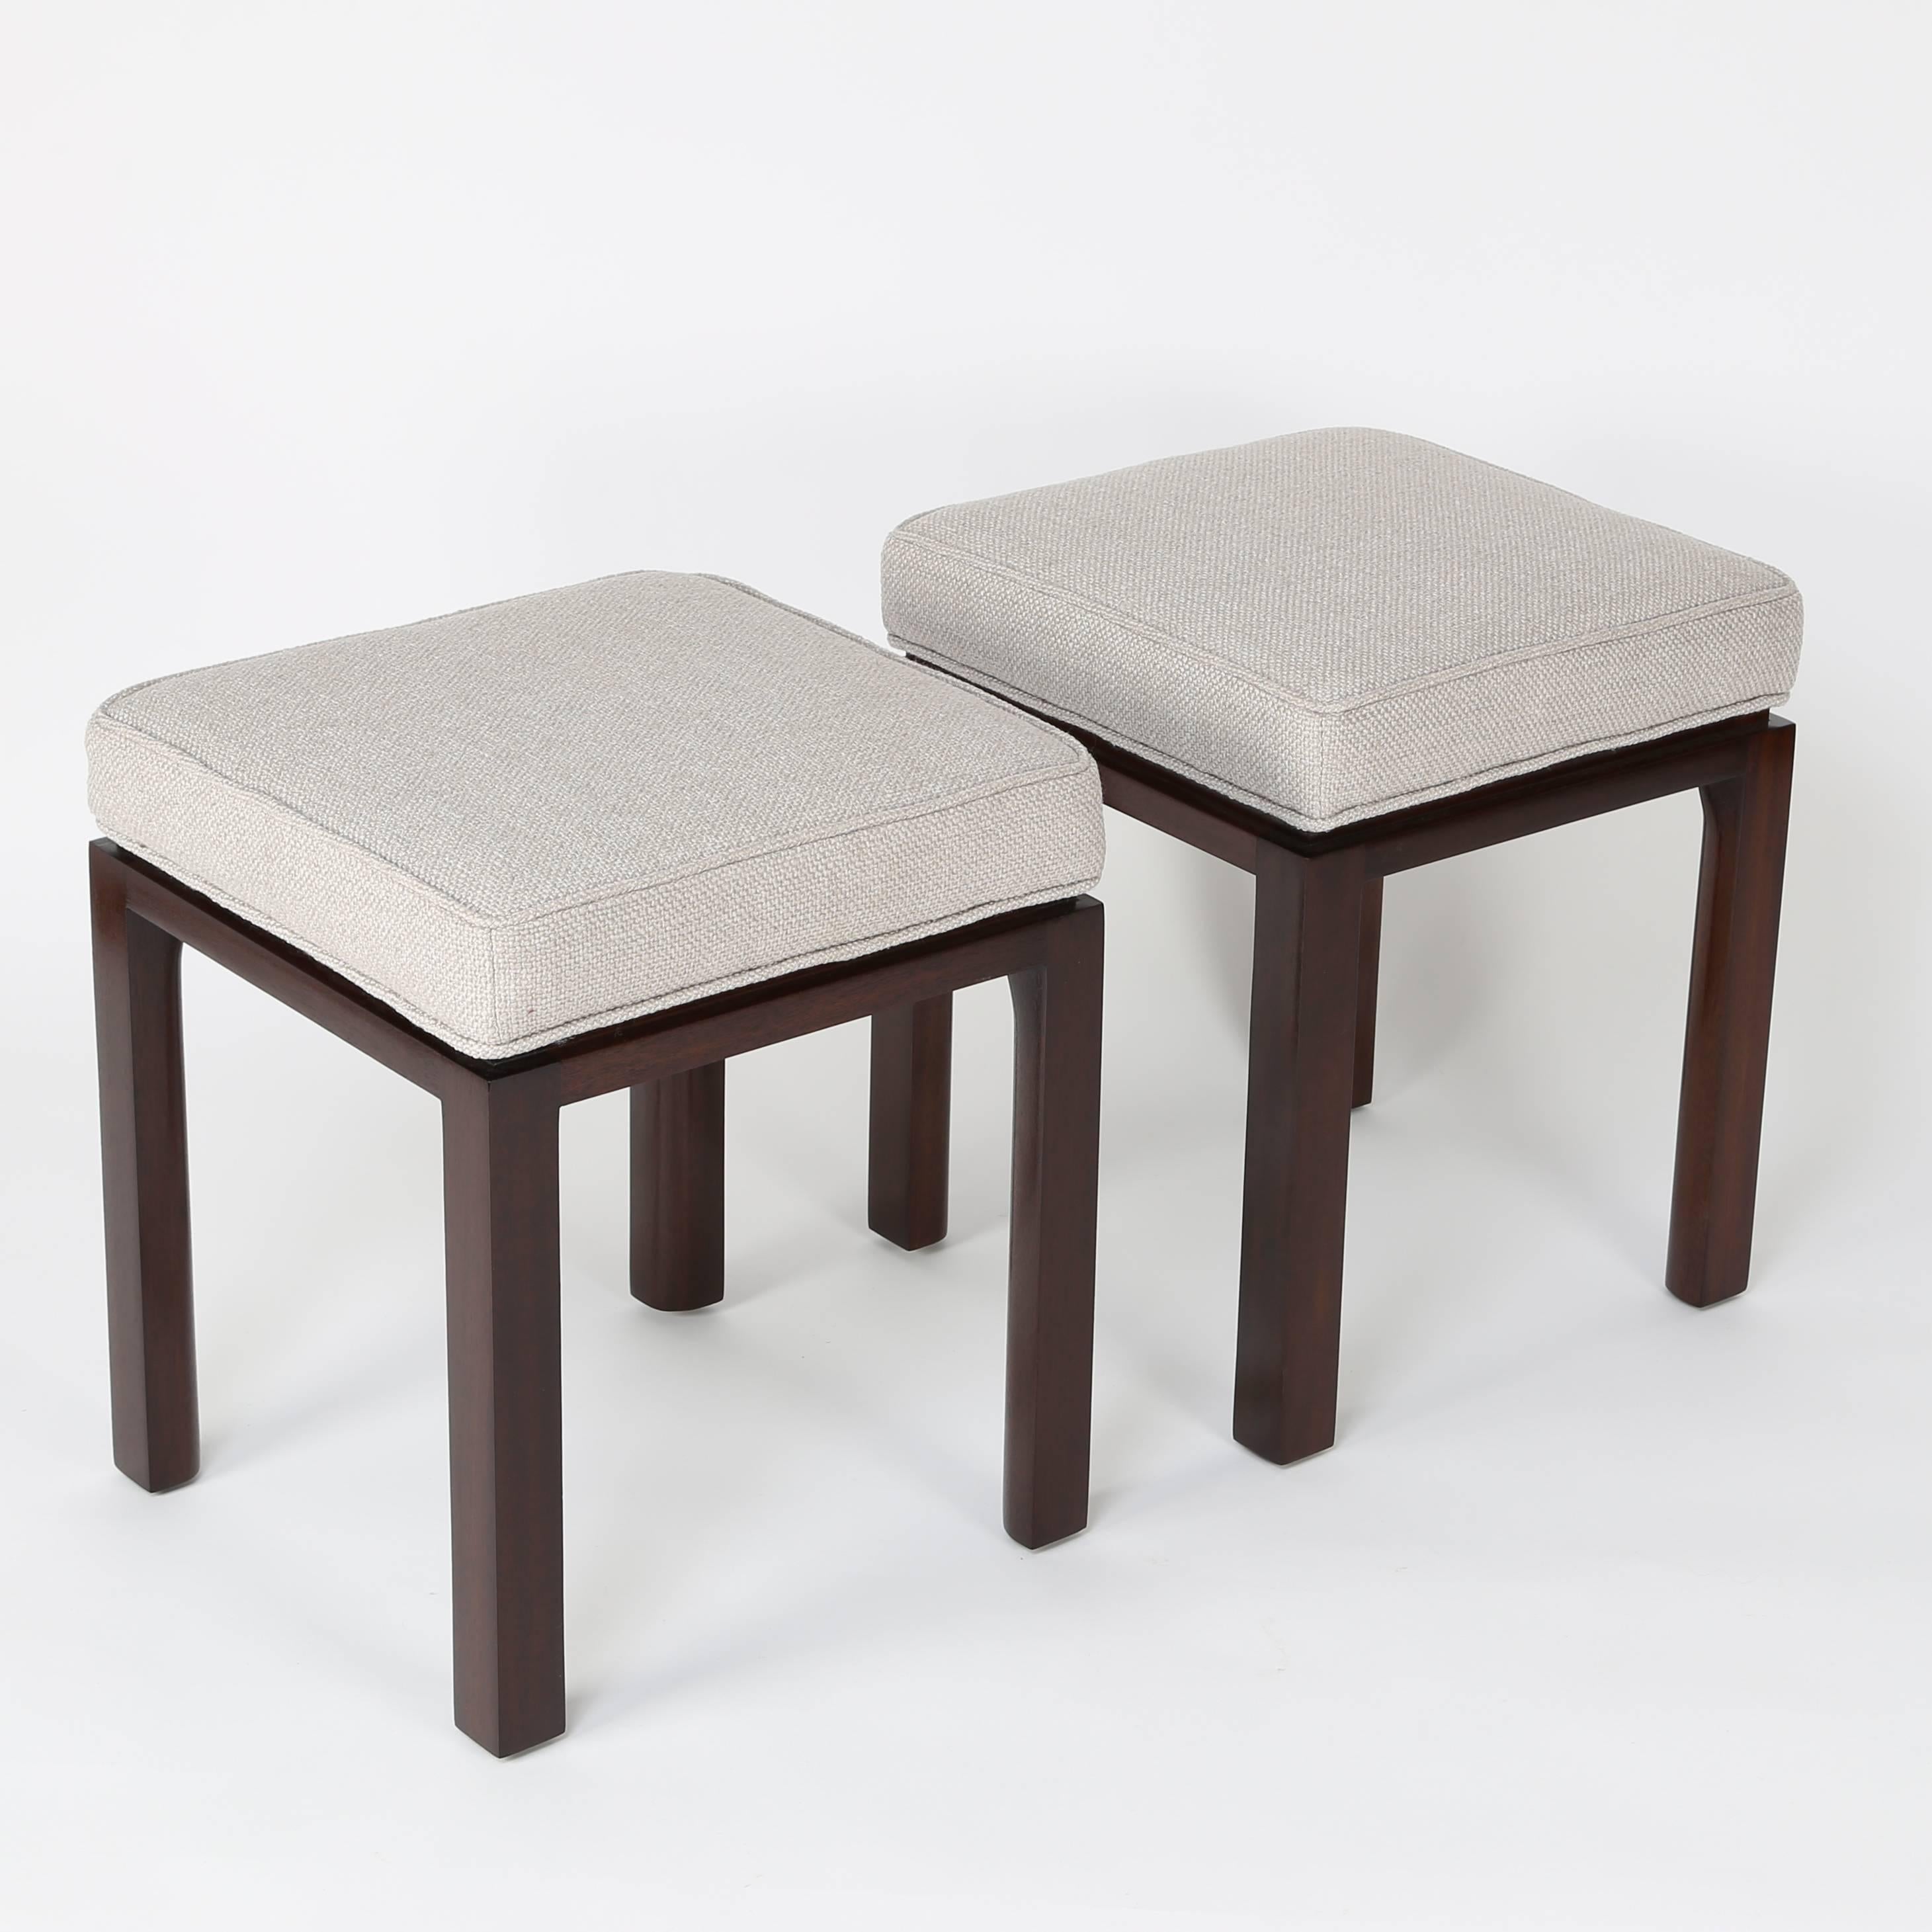 Set of four Harvey Probber stools with mahogany bases, newly refinished and reupholstered in a soft oatmeal-color woven fabric. Fabric swatch available. 

See this item in our Brooklyn showroom, 61 Greenpoint Ave., Suite 312, Brooklyn, 11 a.m. to 5